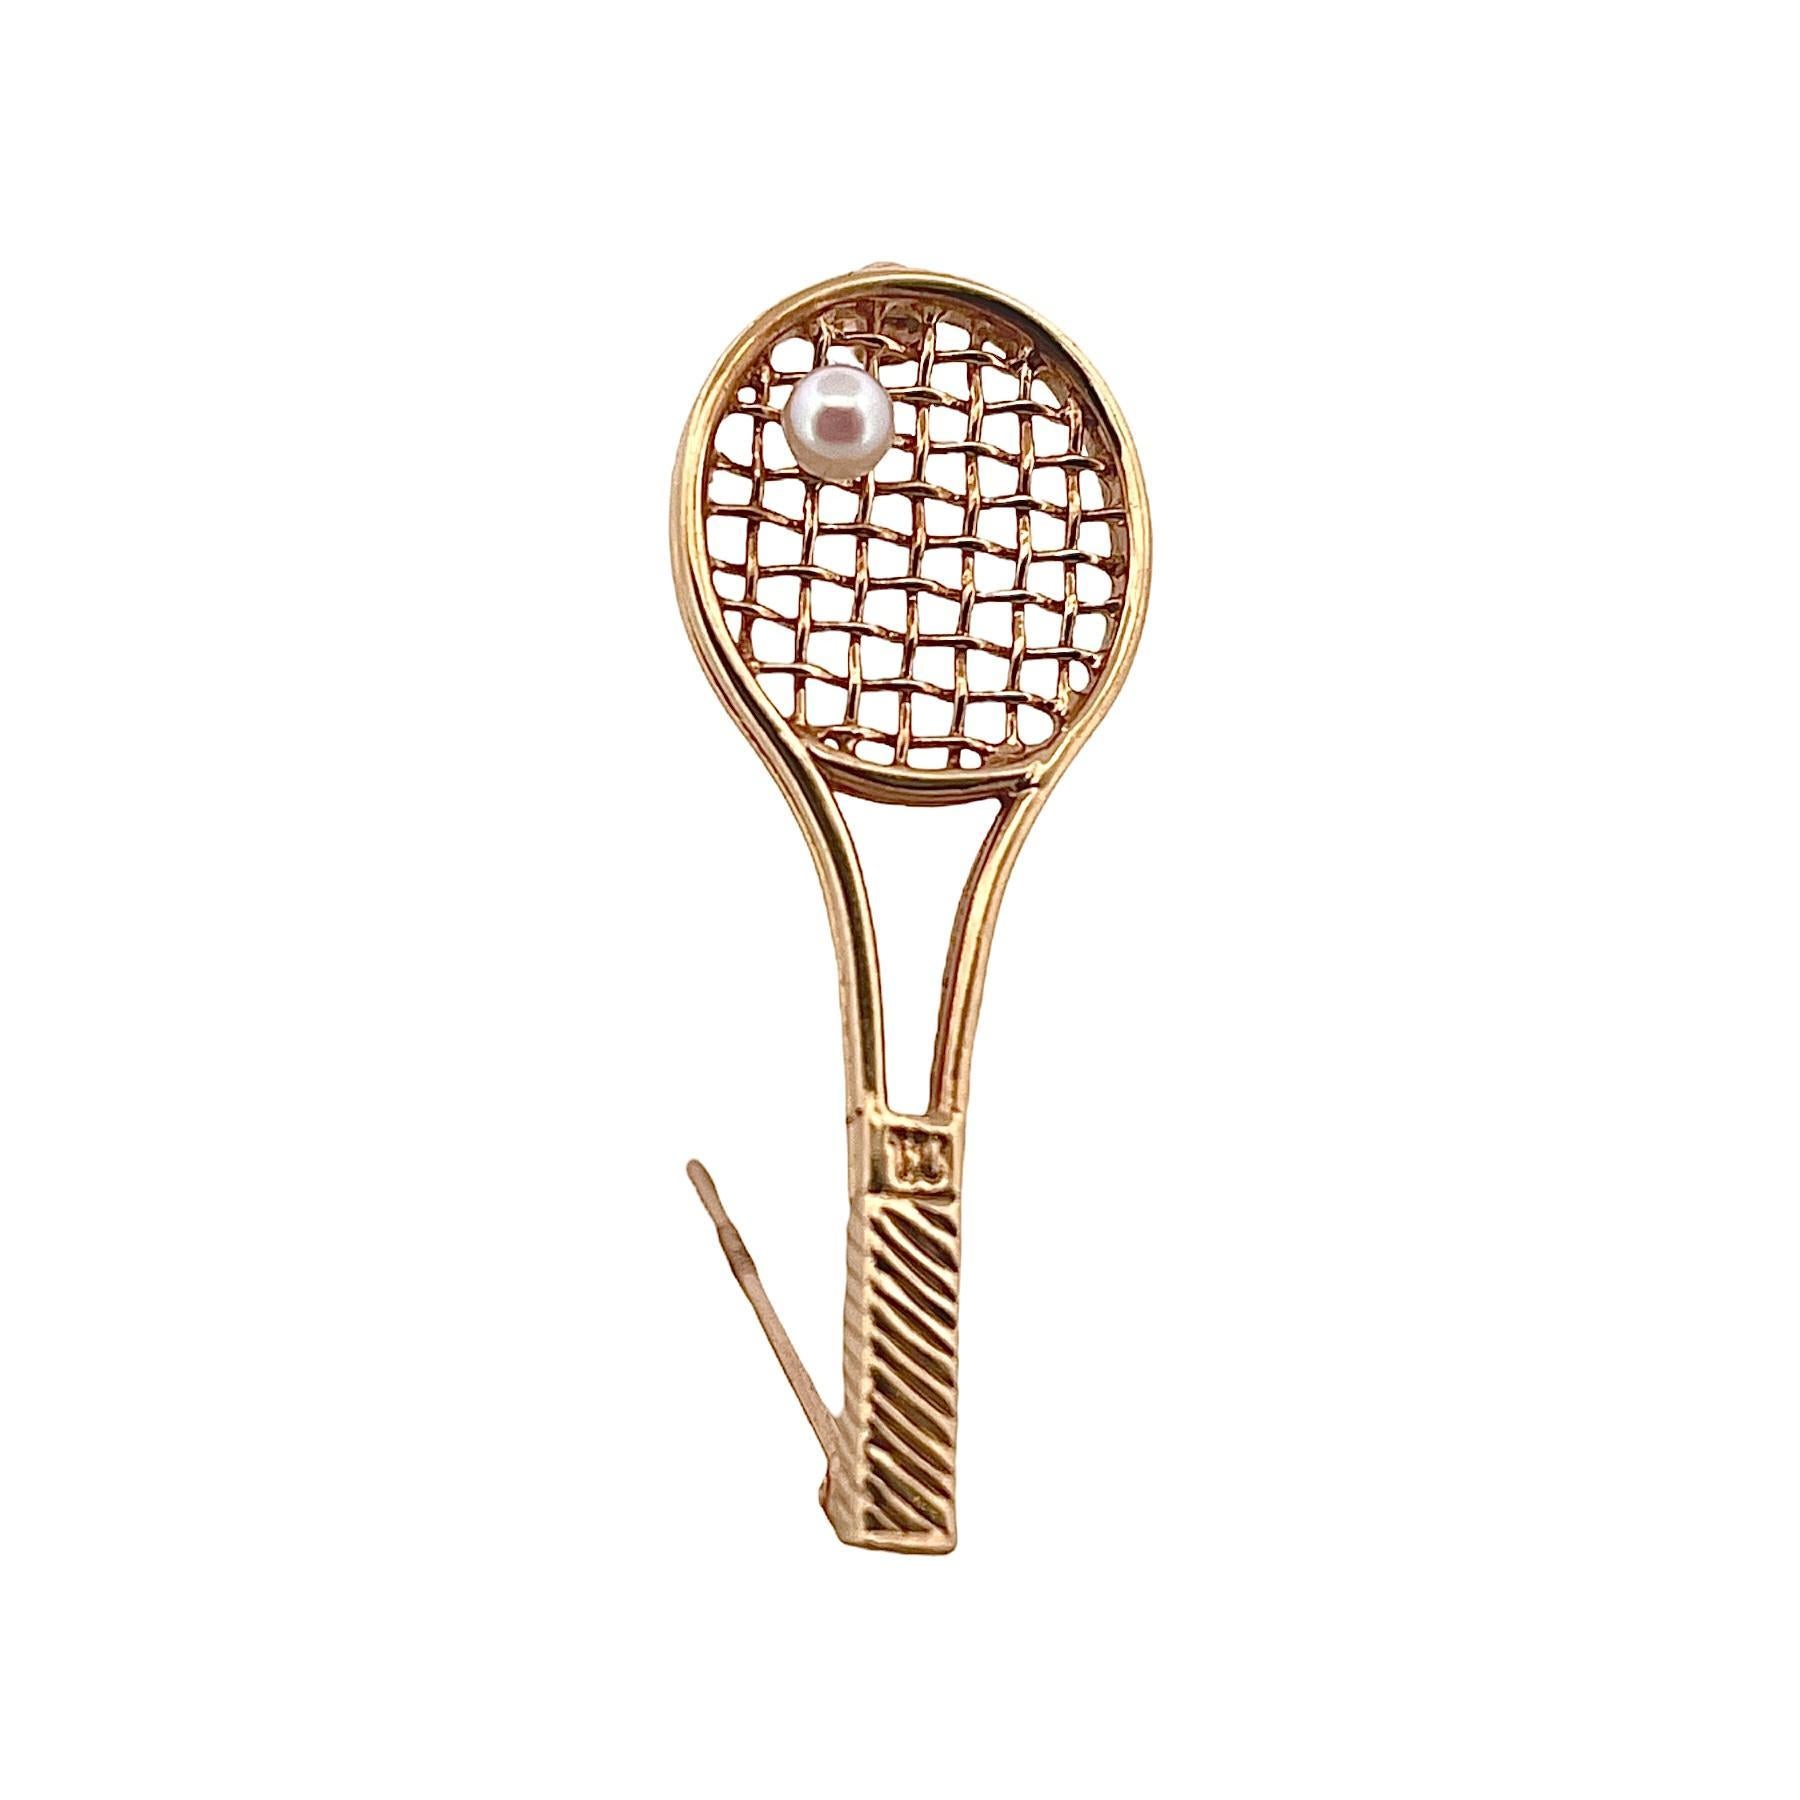 Uncut Larter & Sons Tennis Racket Brooch with Pearl For Sale